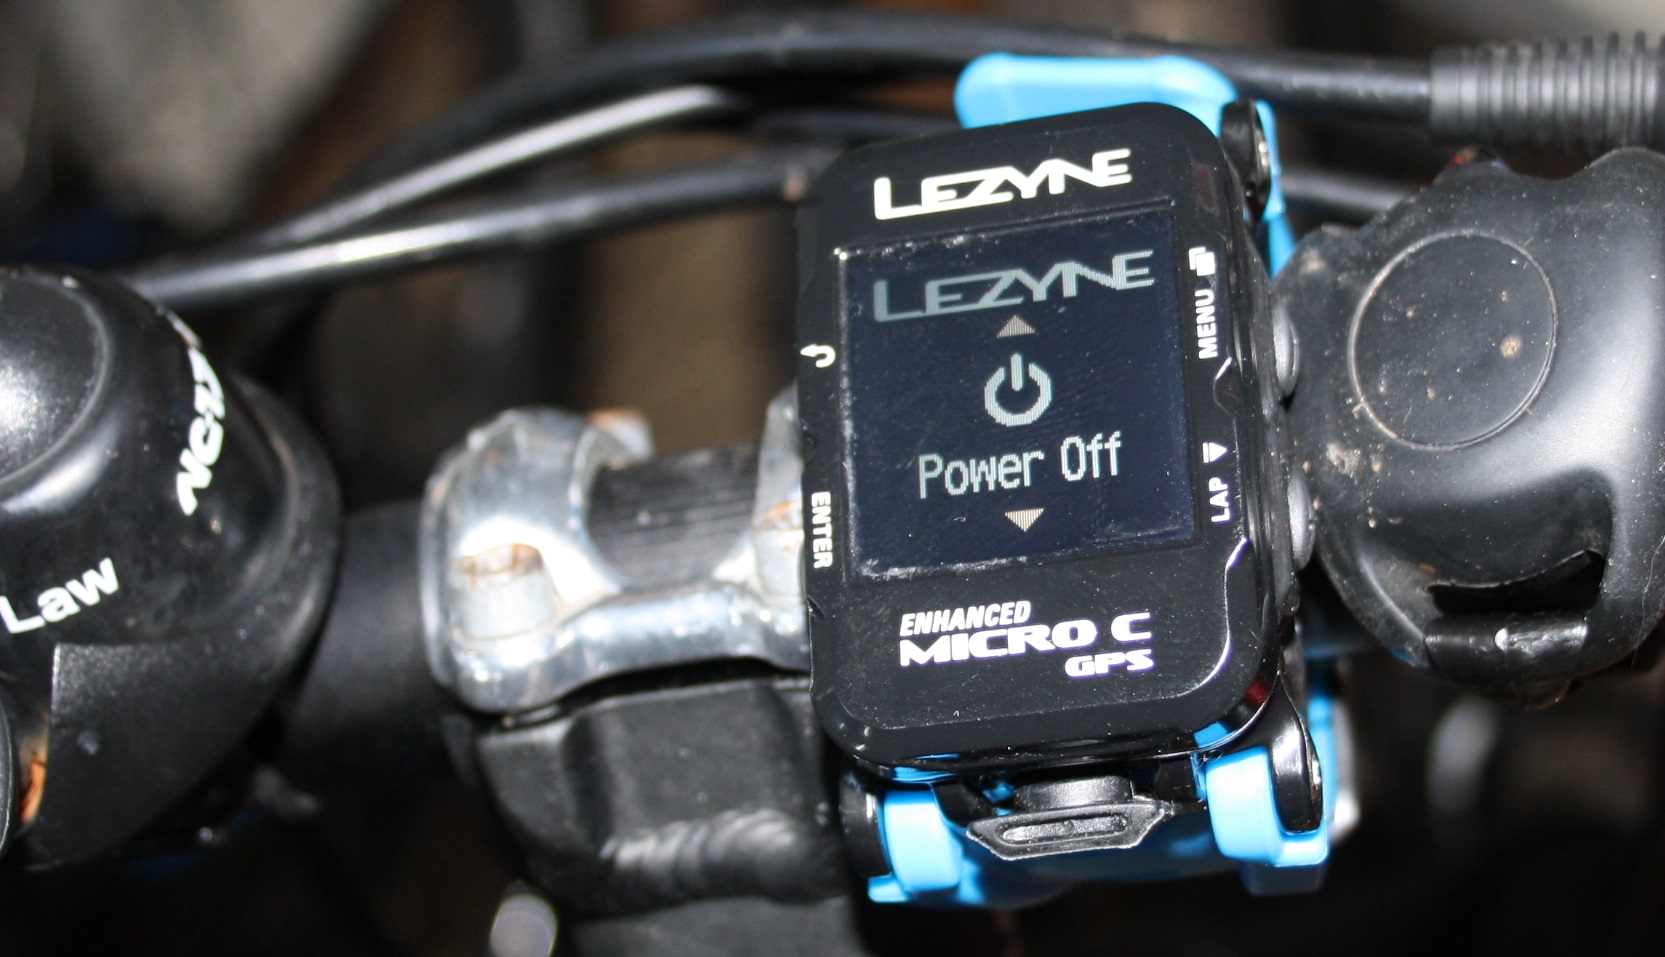 Lezyne Micro Watch Review Additional Coverage of C, GPS, Macro, Mini, Super  Variants